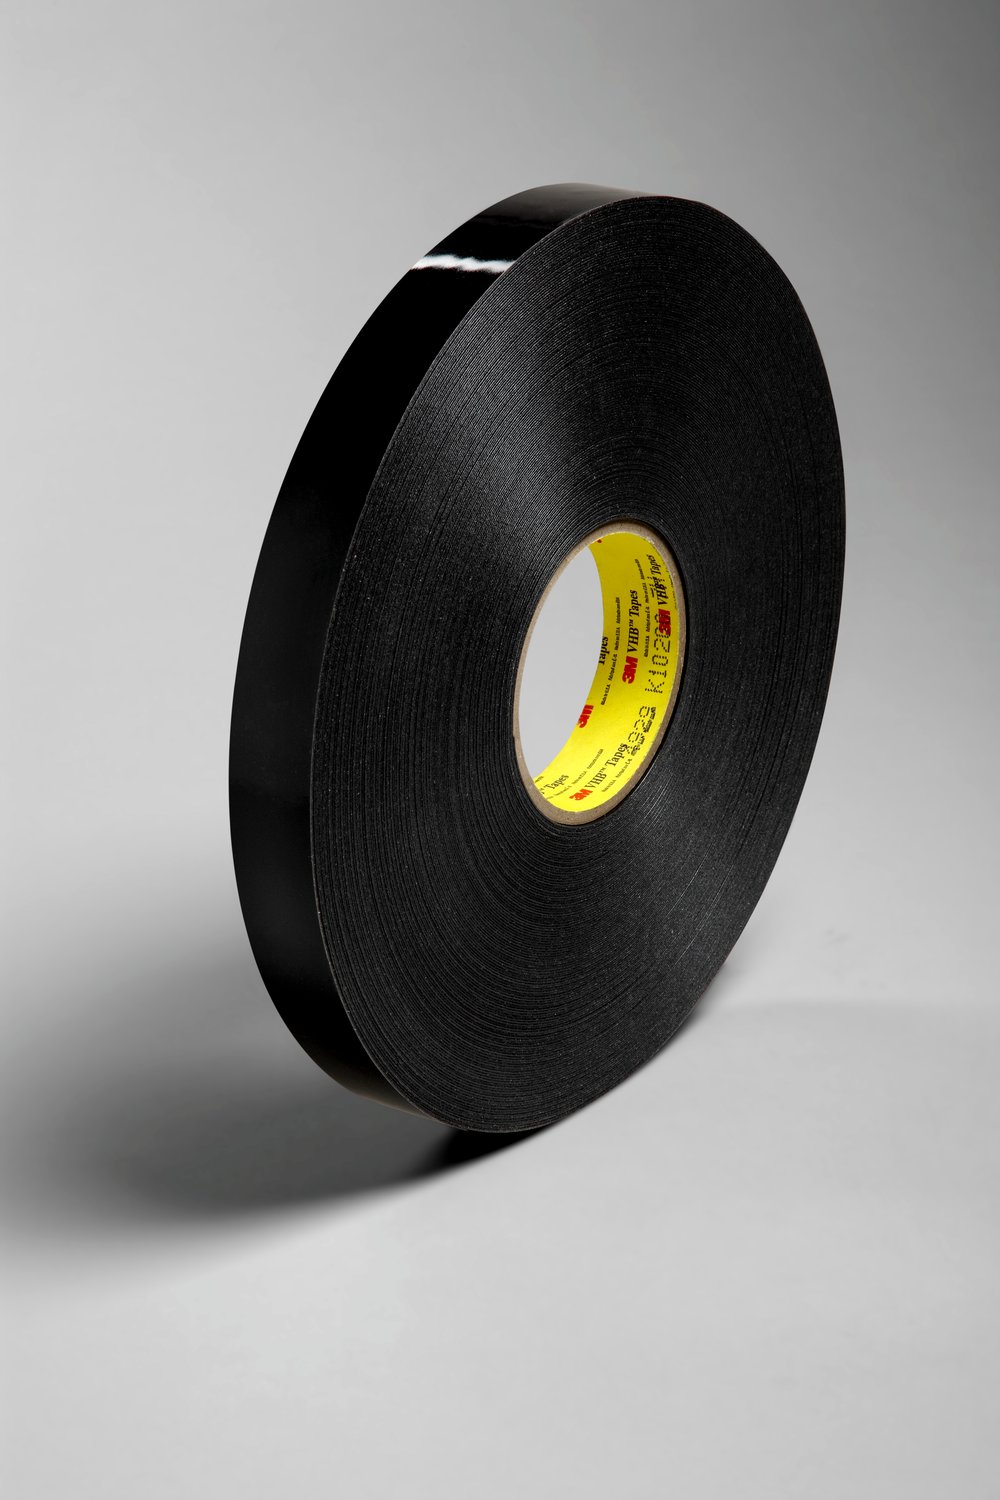 3M Electrical Tape, 2 mil, 2 x 72 Yd., Yellow 3M 1318-2 2 x 72 yds Yellow